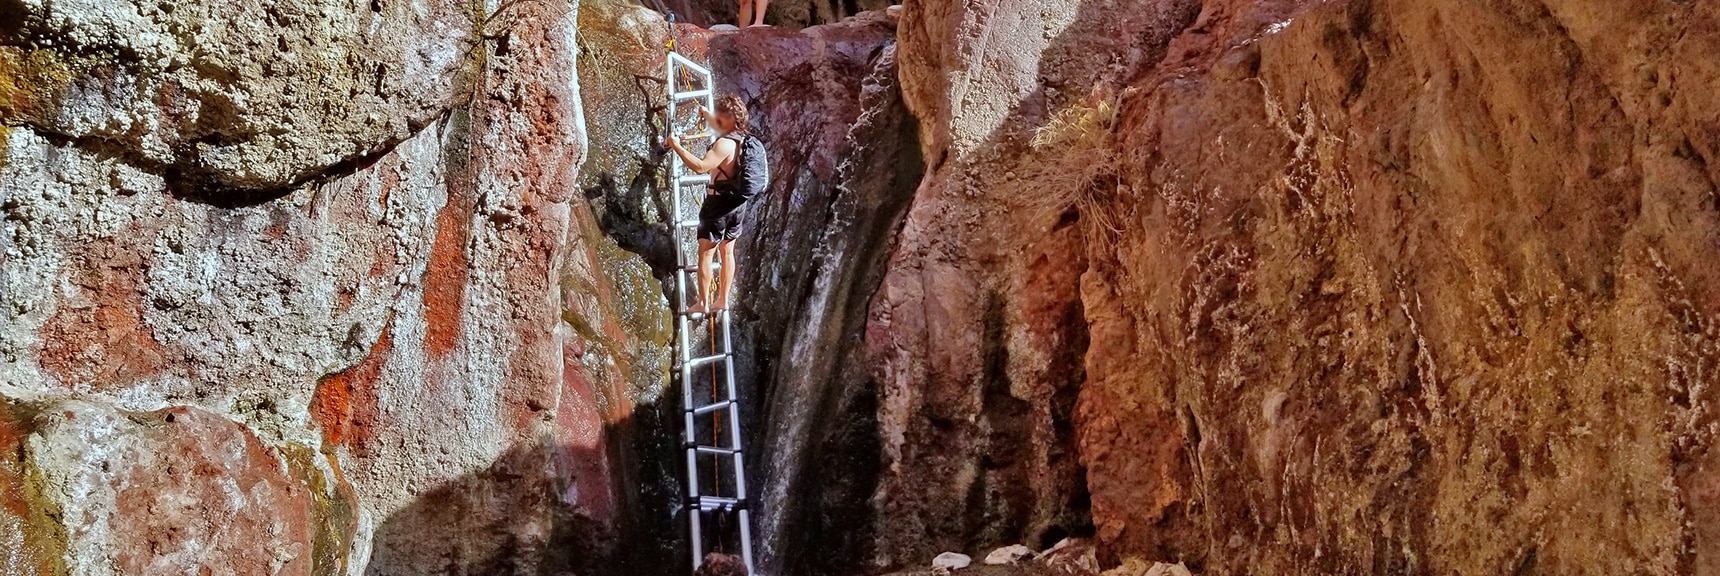 The Big Bad Ladder! 20-30ft, Slick, Showered with Water. Hang On! | Arizona Hot Spring | Liberty Bell Arch | Lake Mead National Recreation Area, Arizona